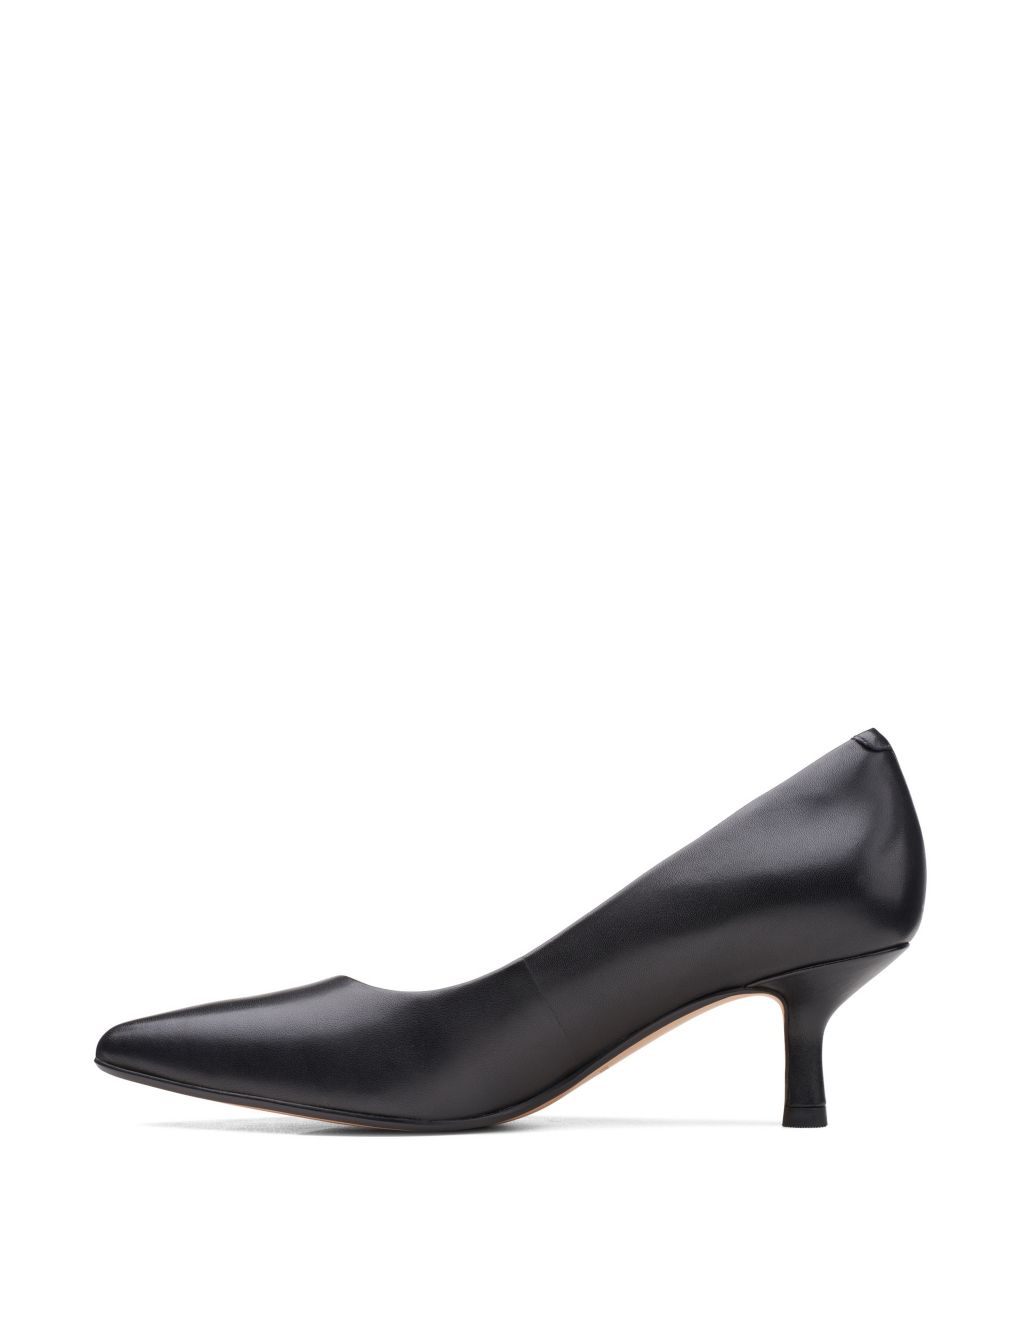 Leather Kitten Heel Court Shoes image 6